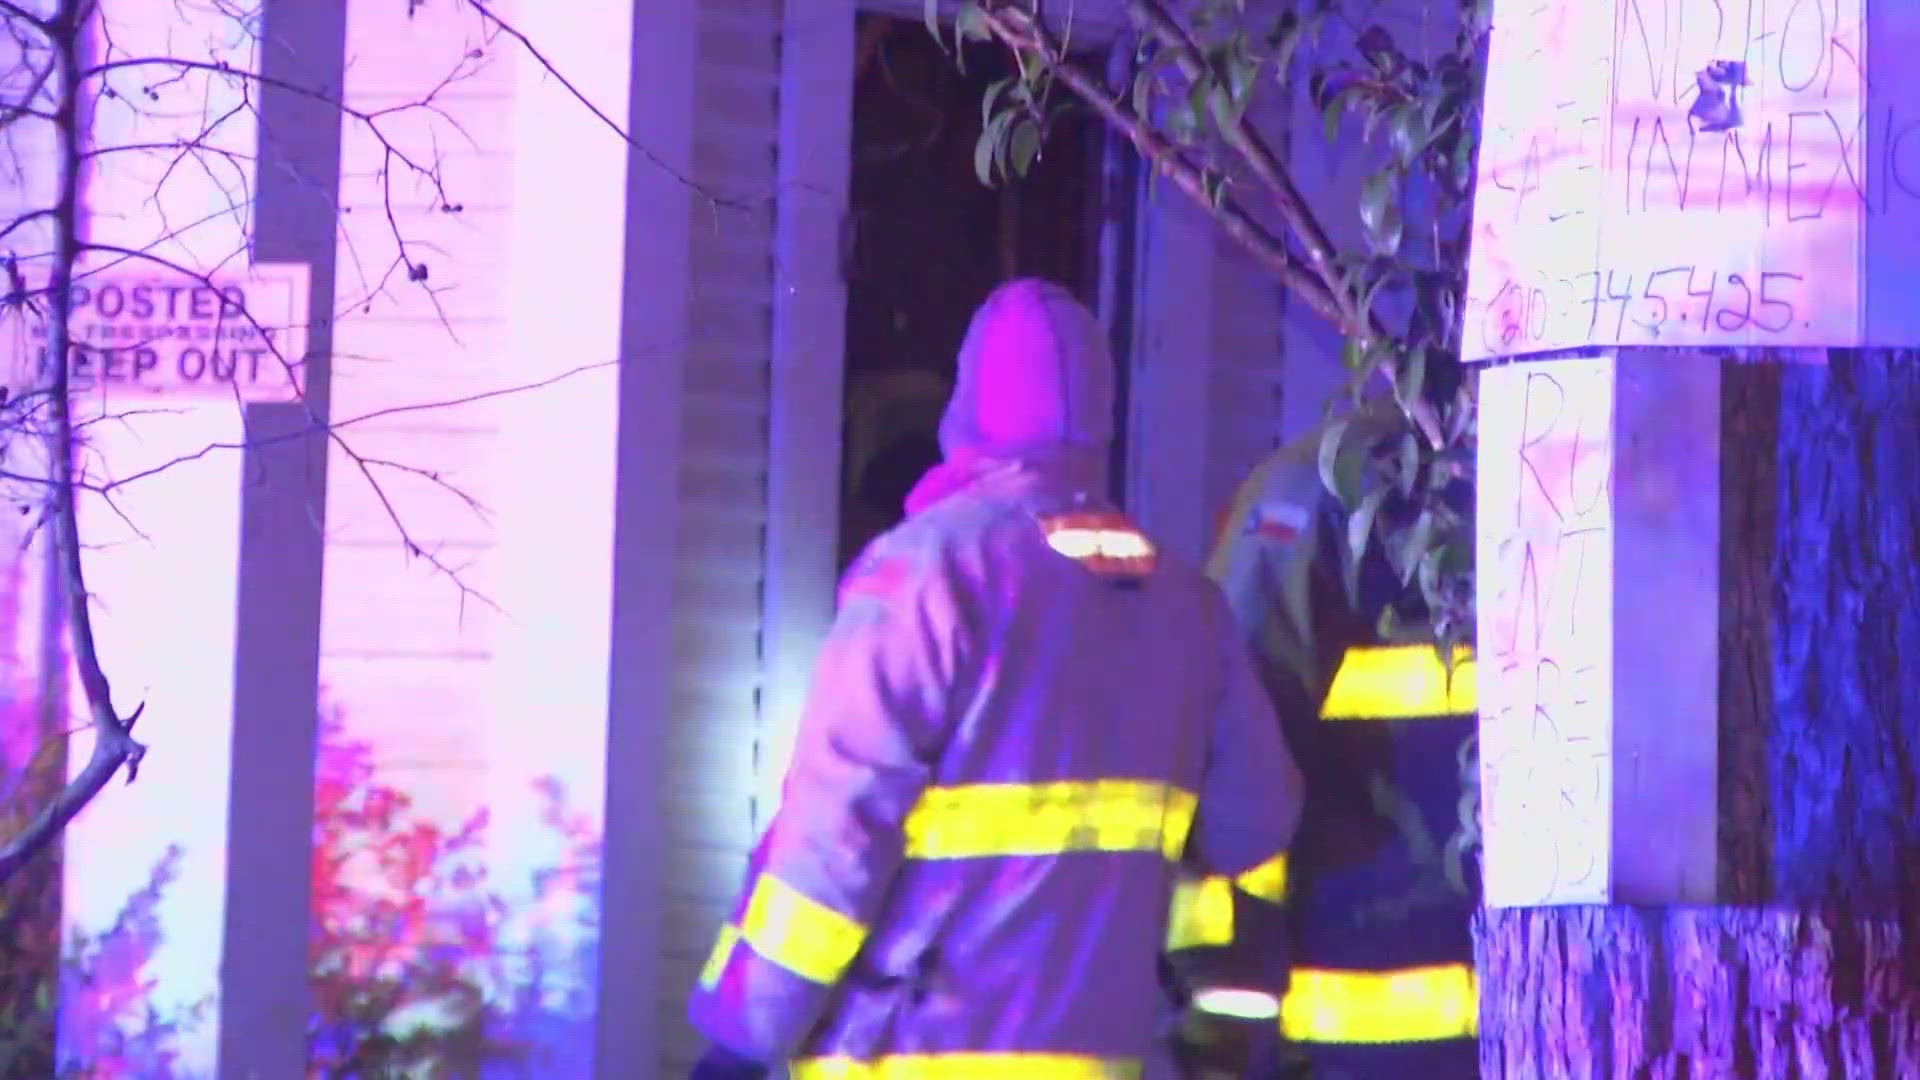 SAFD trying to determine if cold weather is to blame for fire